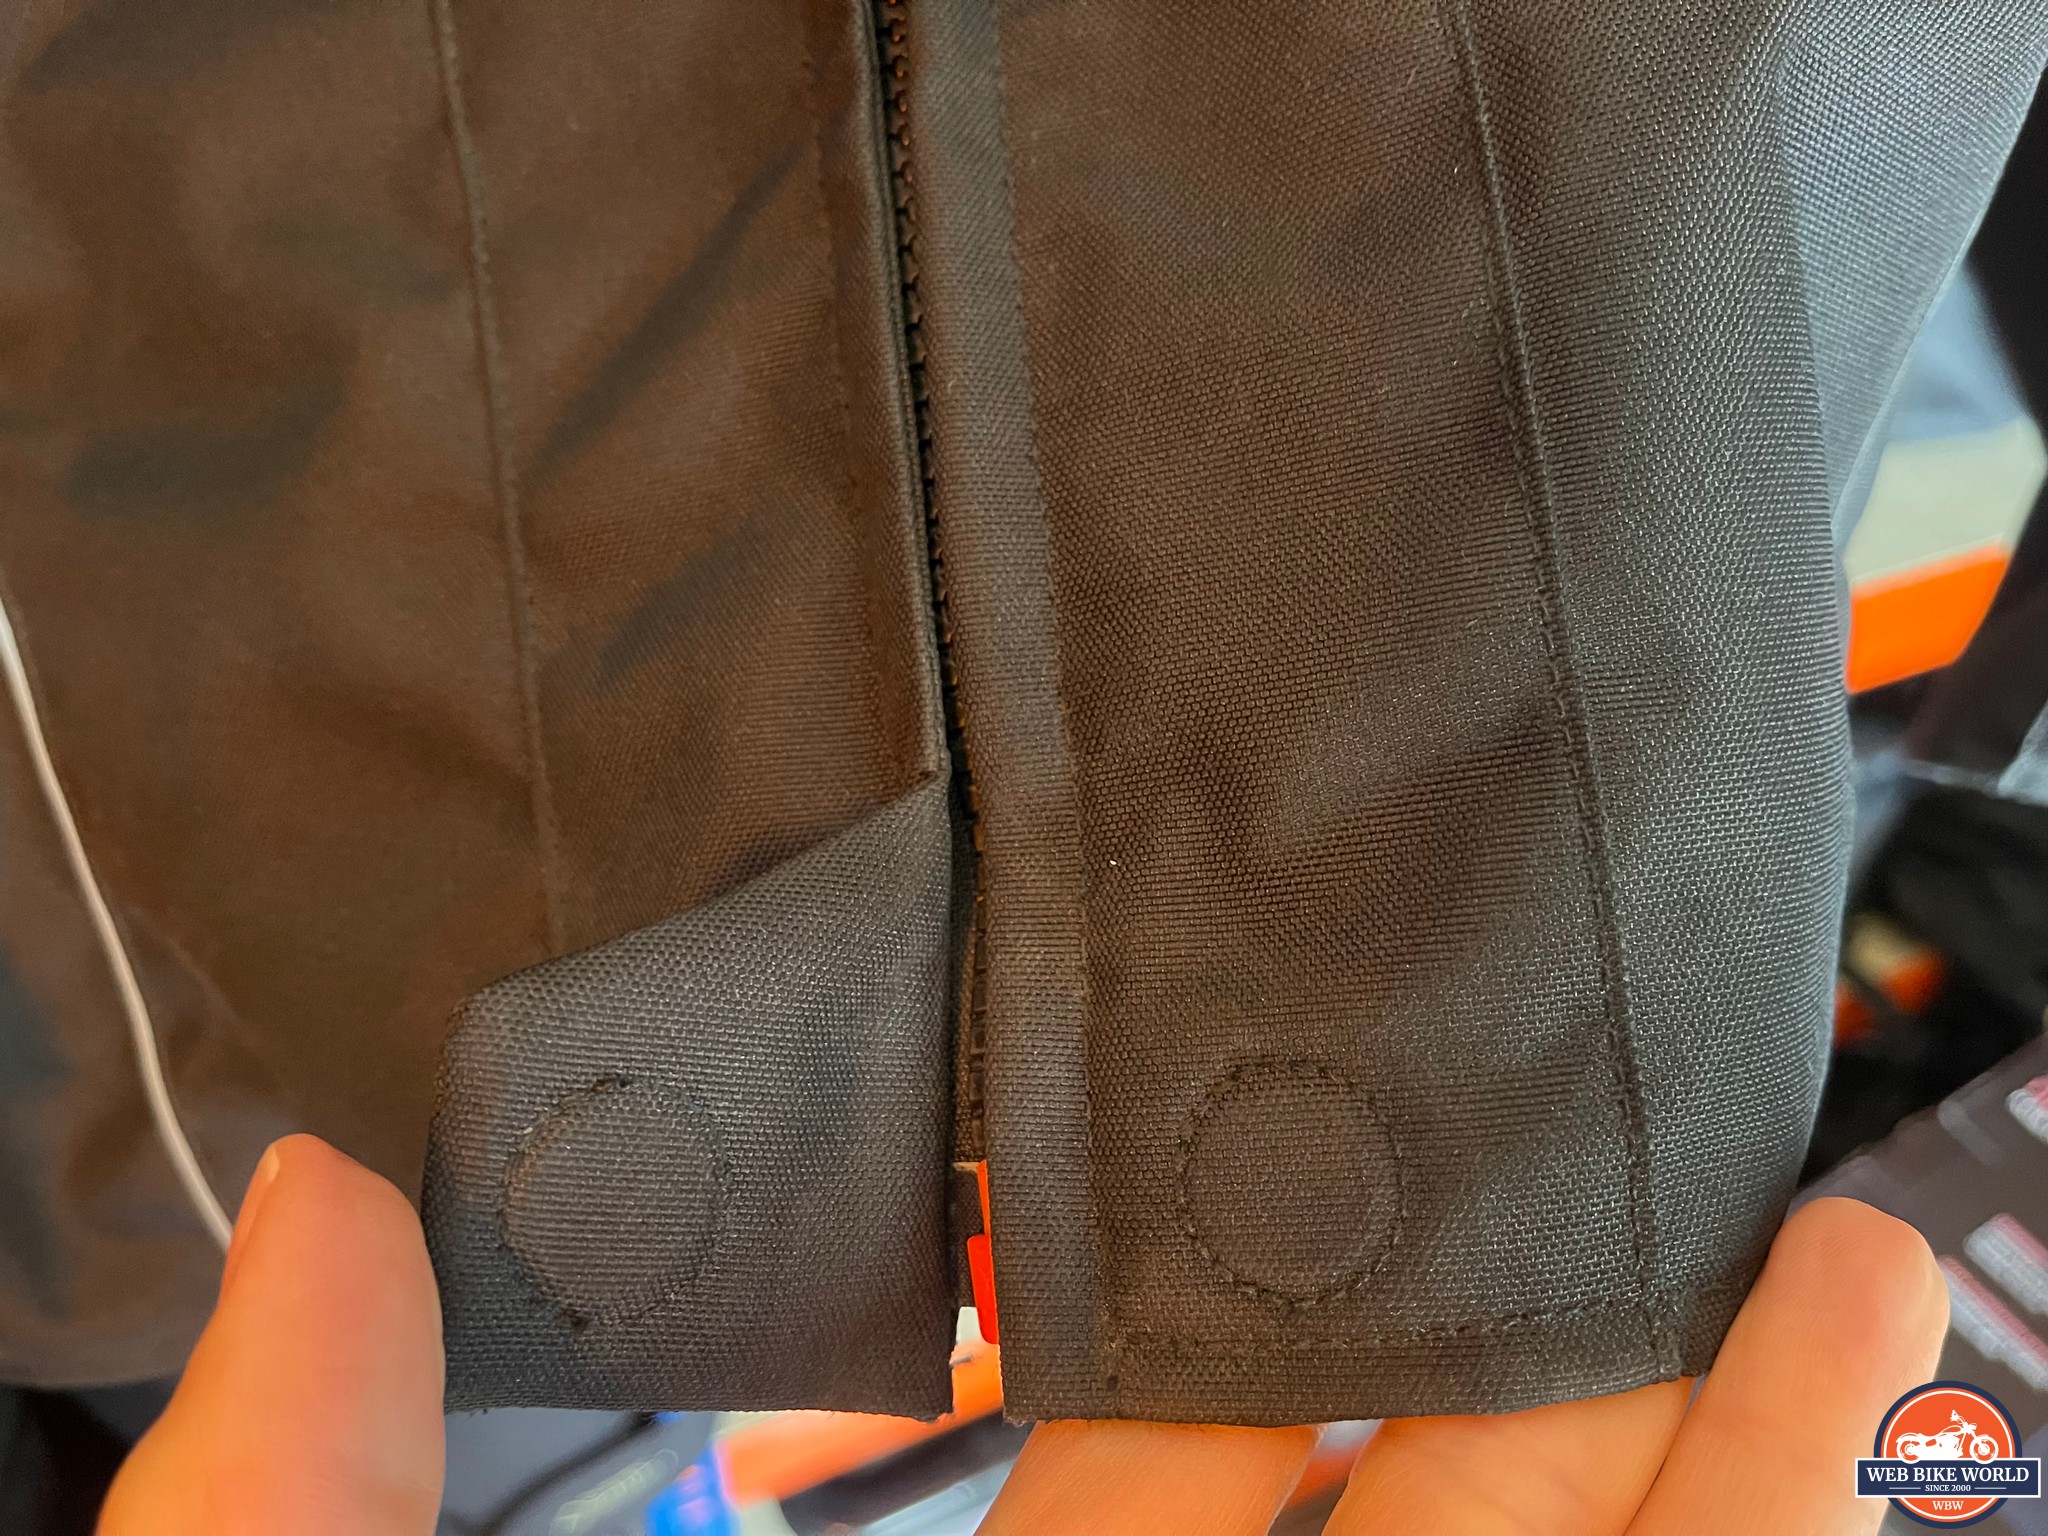 magnetic fastening at the bottom of the zippers